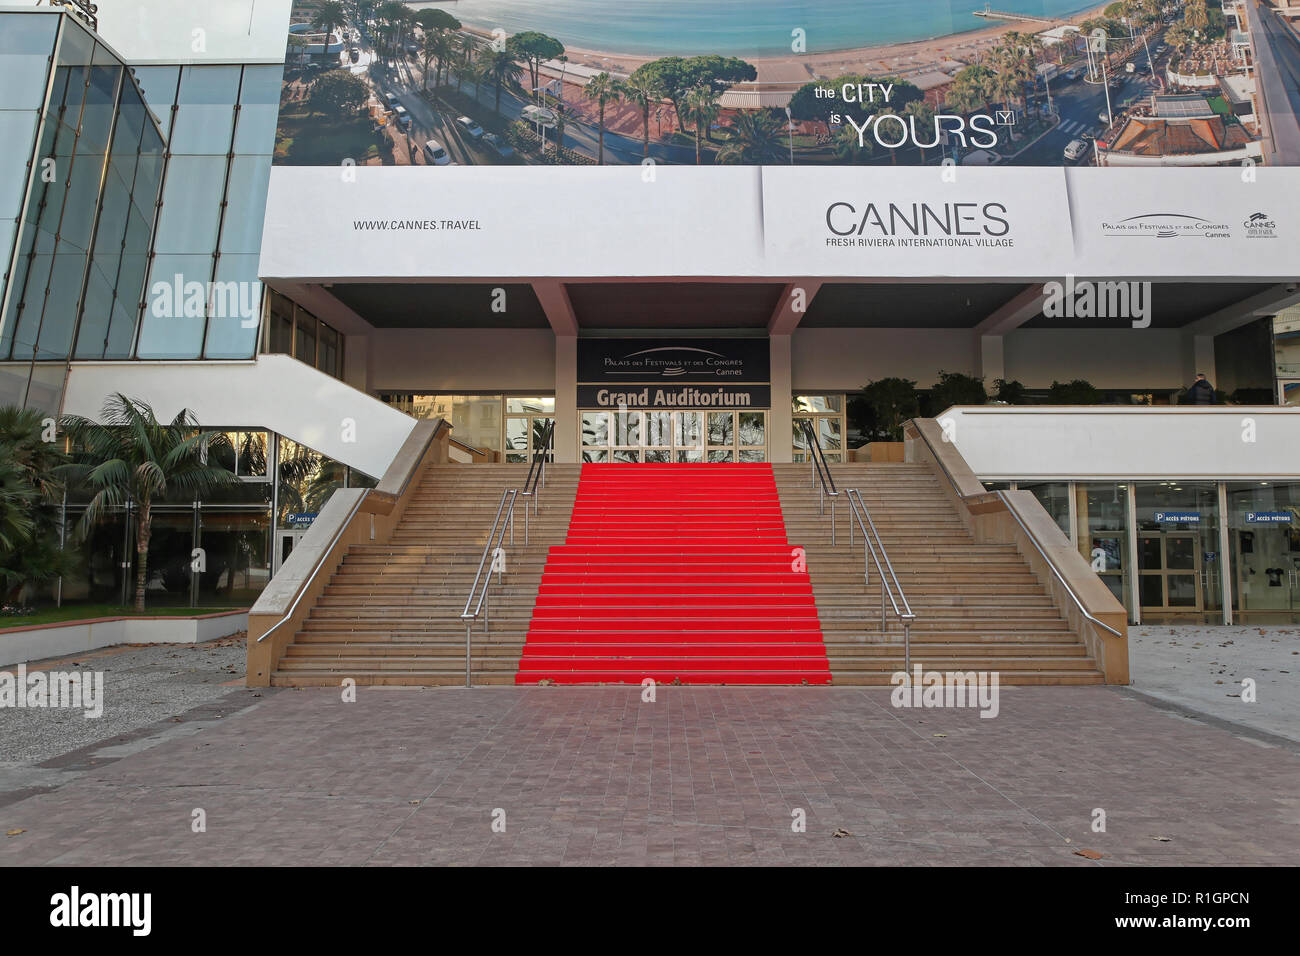 Cannes, France - January 20, 2012: Grand Auditorium Cannes Red Carpet Stairway at Palais des Festivals et des Congres in Cannes, France. Stock Photo